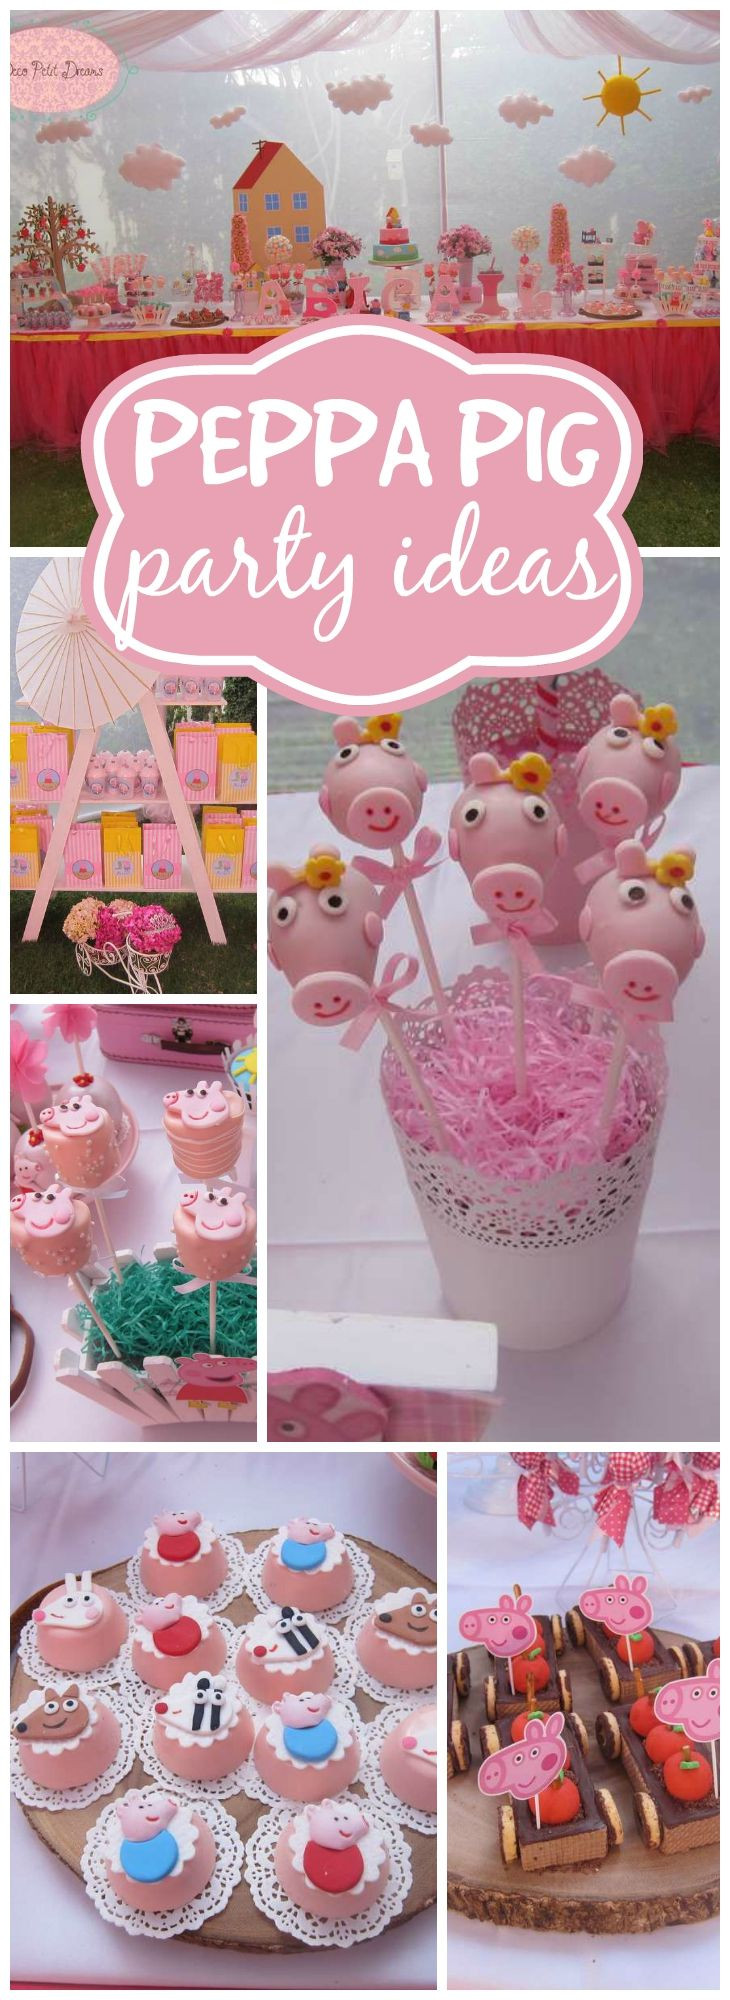 3Rd Birthday Party Ideas
 Peppa Pig Party Birthday "Peppa Pig 3rd Birthday